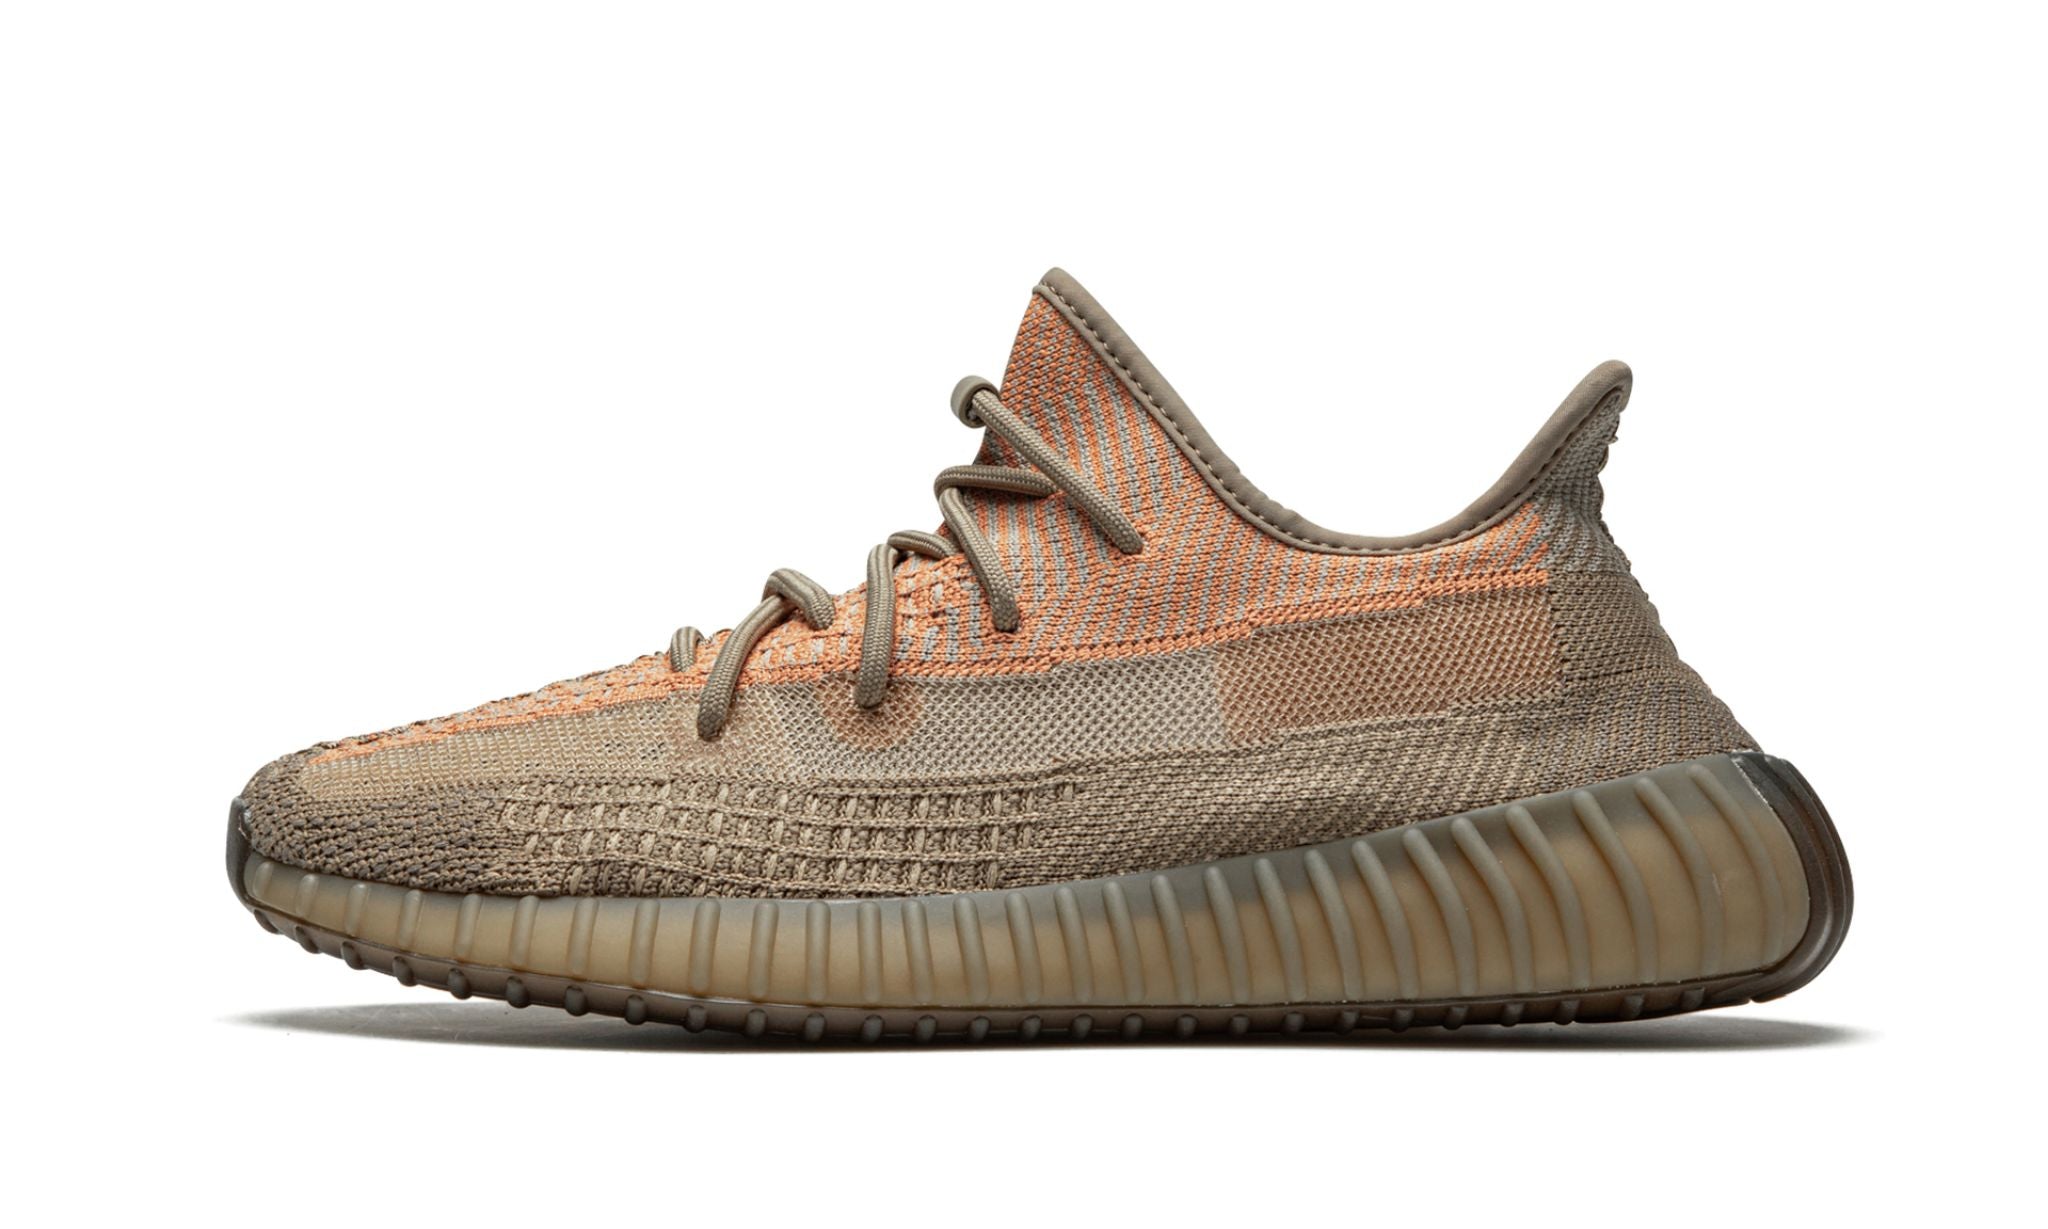 Yeezy Boost 350 V2 ”Sand Taupe”